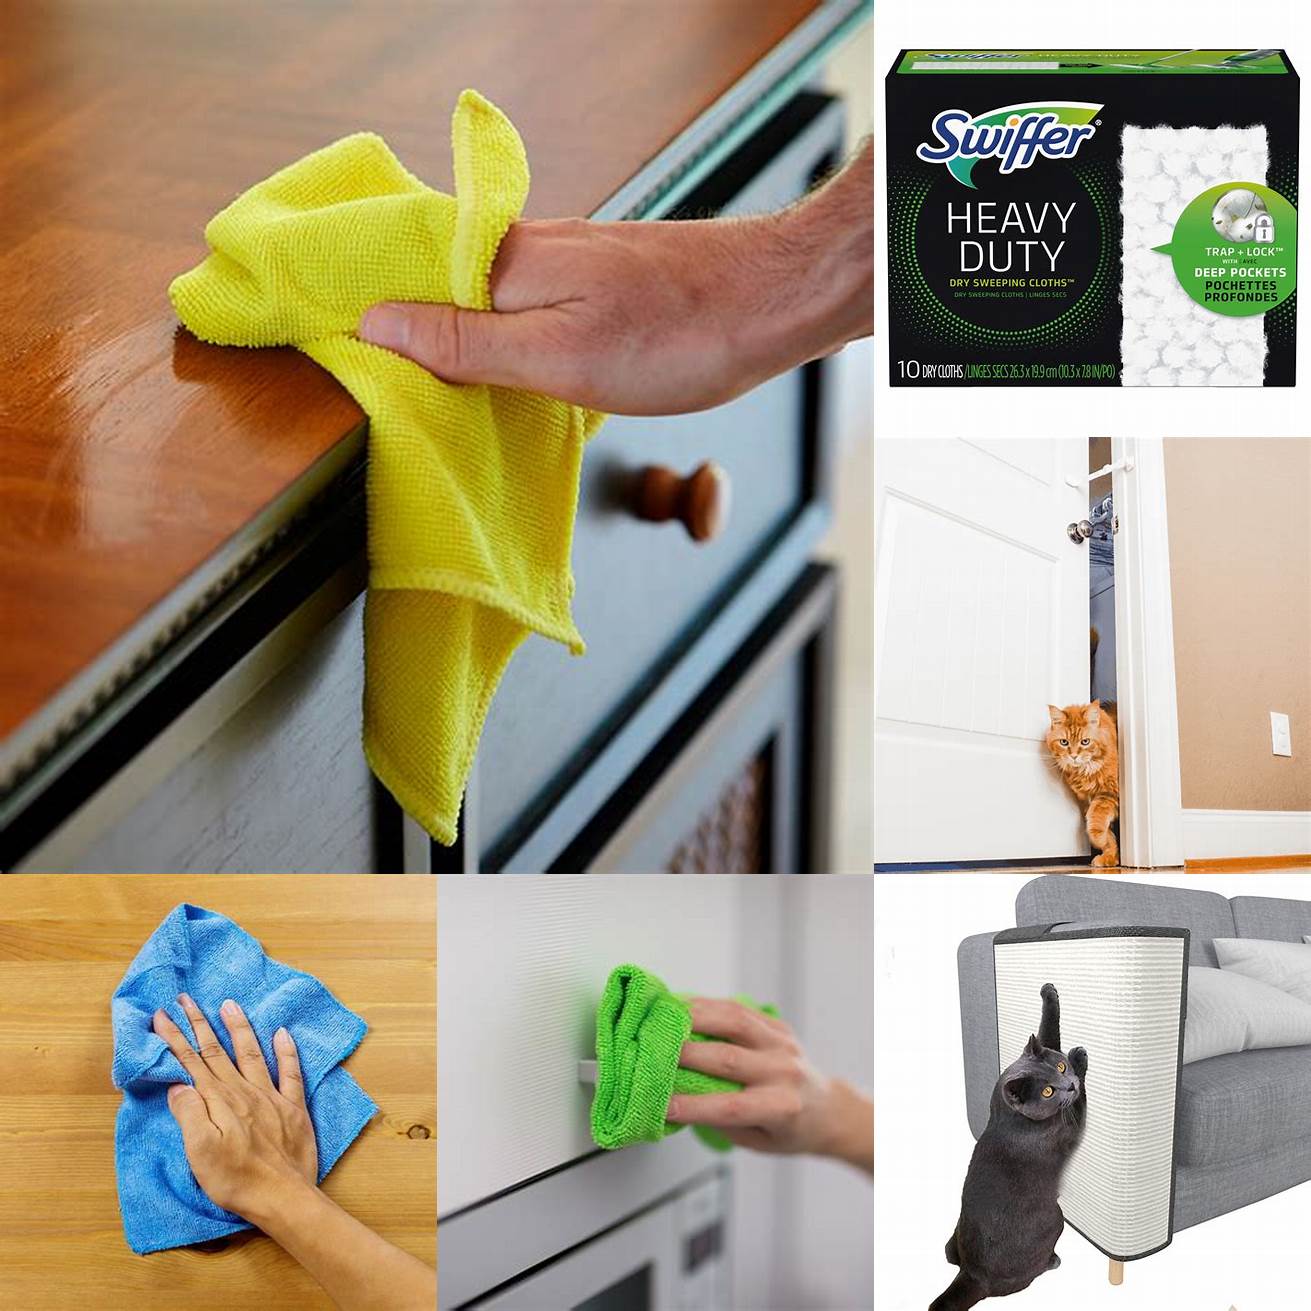 Clean the doors surface with a dry cloth